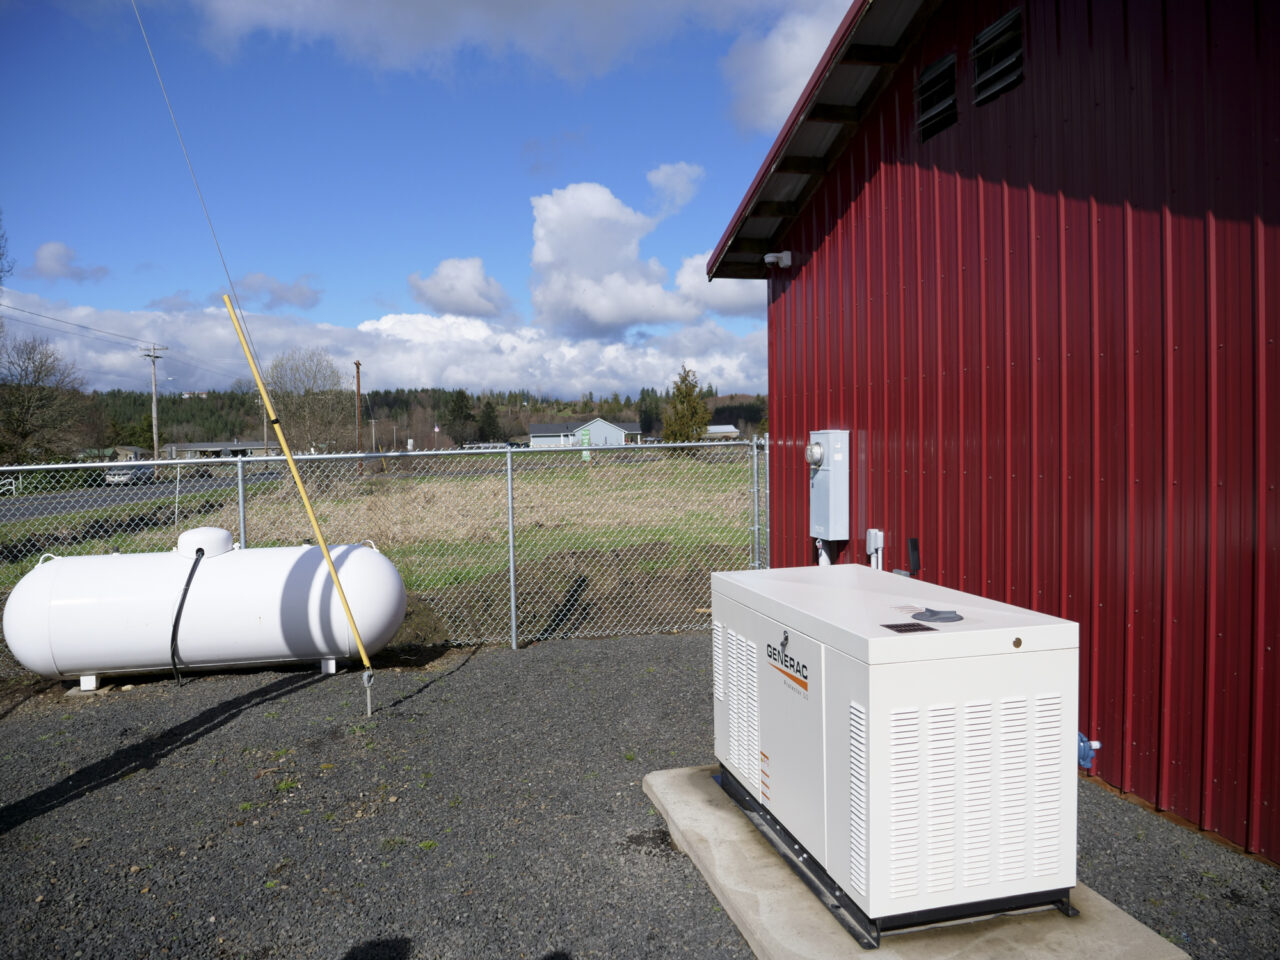 The grants from TransAlta allowed the hatchery program to buy a generator, which is critical to the fishes' survival in case of a power outage. It's seen here at Onalaska High School in Onalaska, Washington on March 5, 2024. (Jeremy Long - WITF)